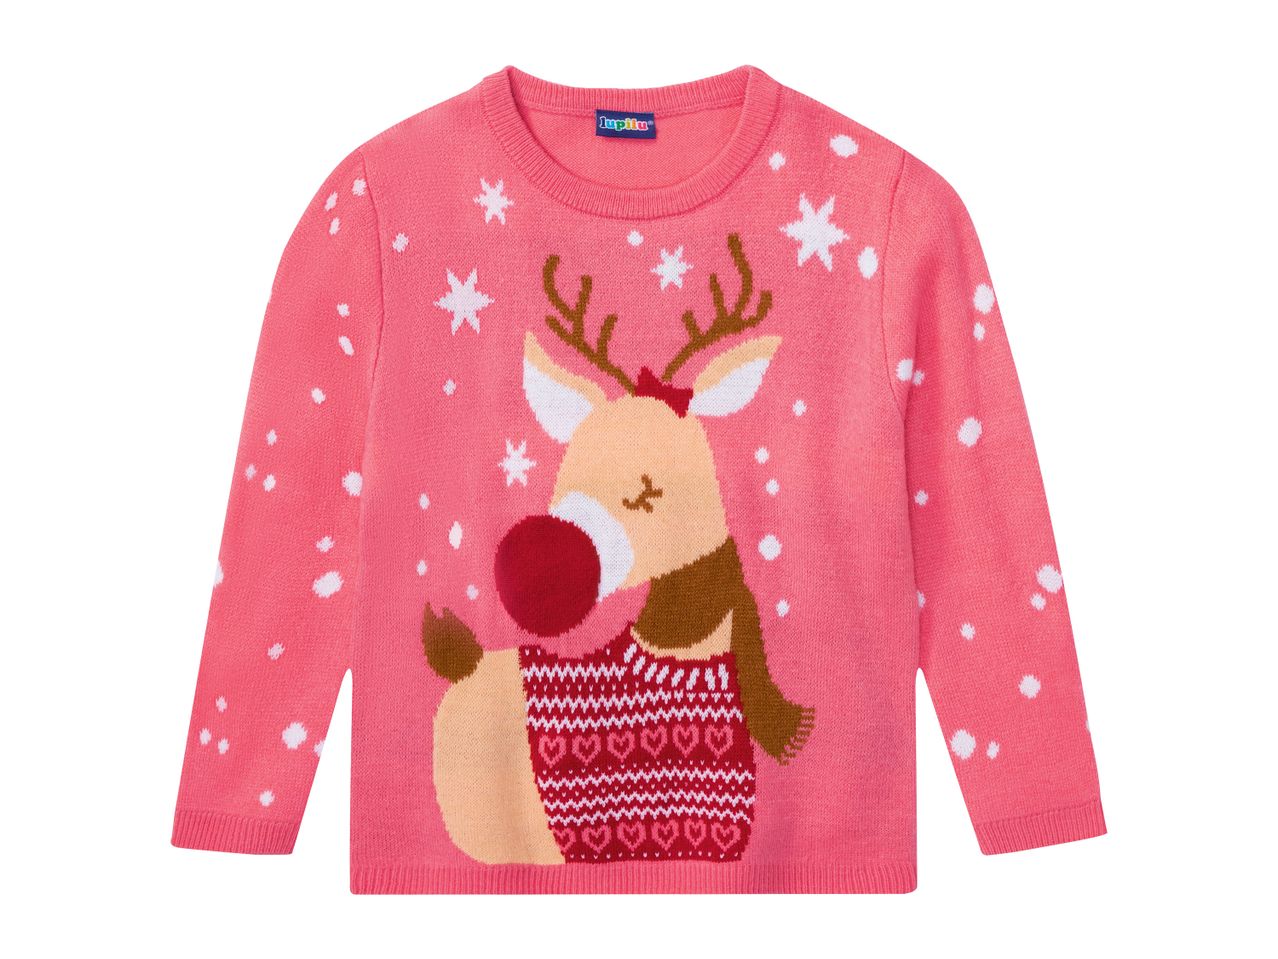 Go to full screen view: Lupilu Younger Kids’ Light-Up Christmas Jumper - Image 1